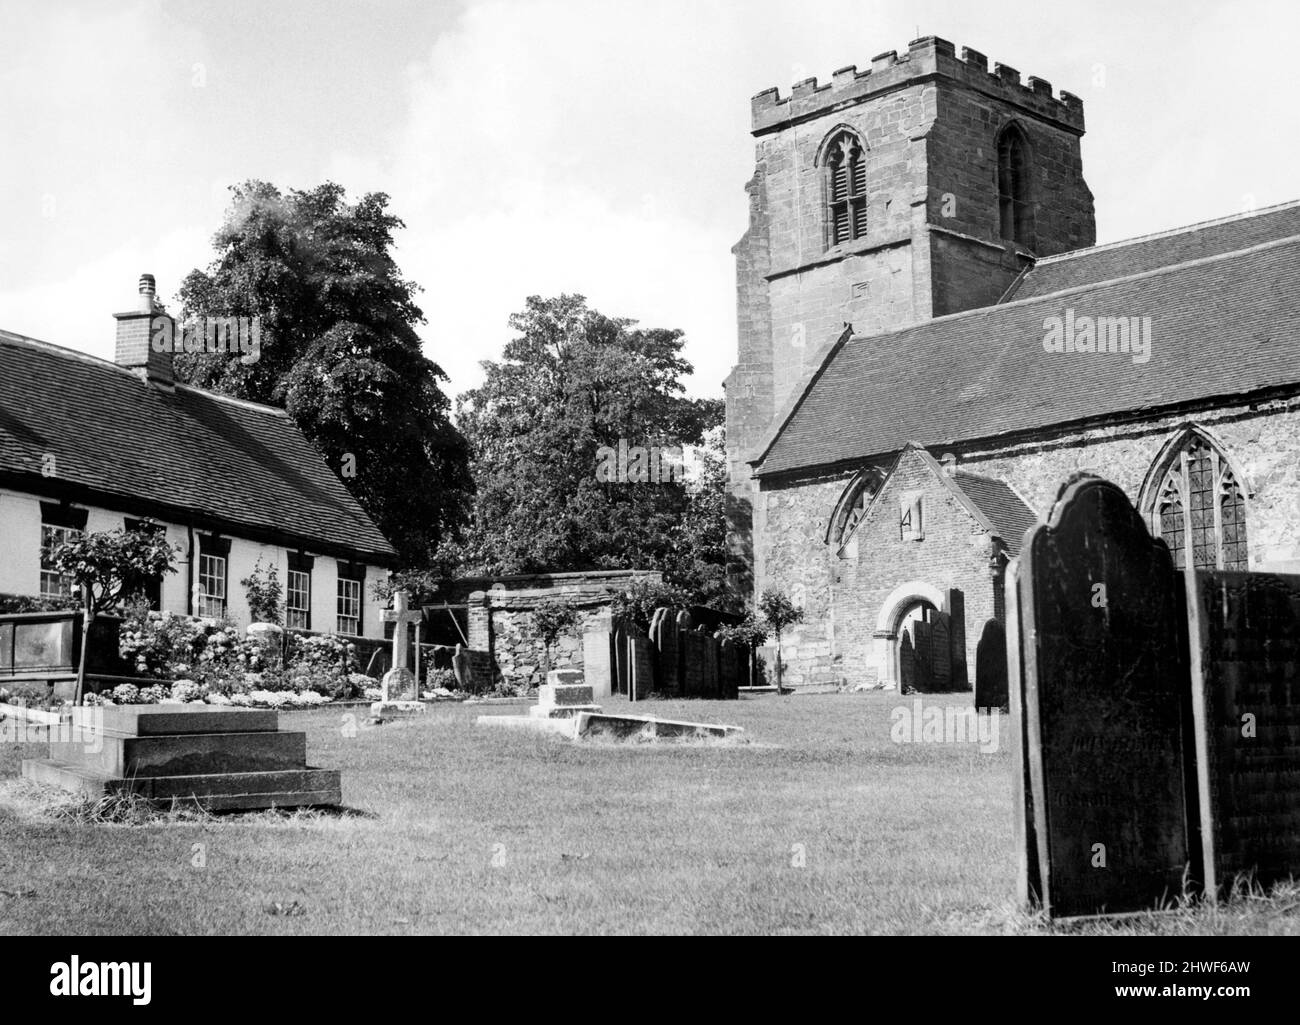 A view of St Peter's Parish church in the village of Mancetter, North Warwickshire.  28th September 1970. Stock Photo